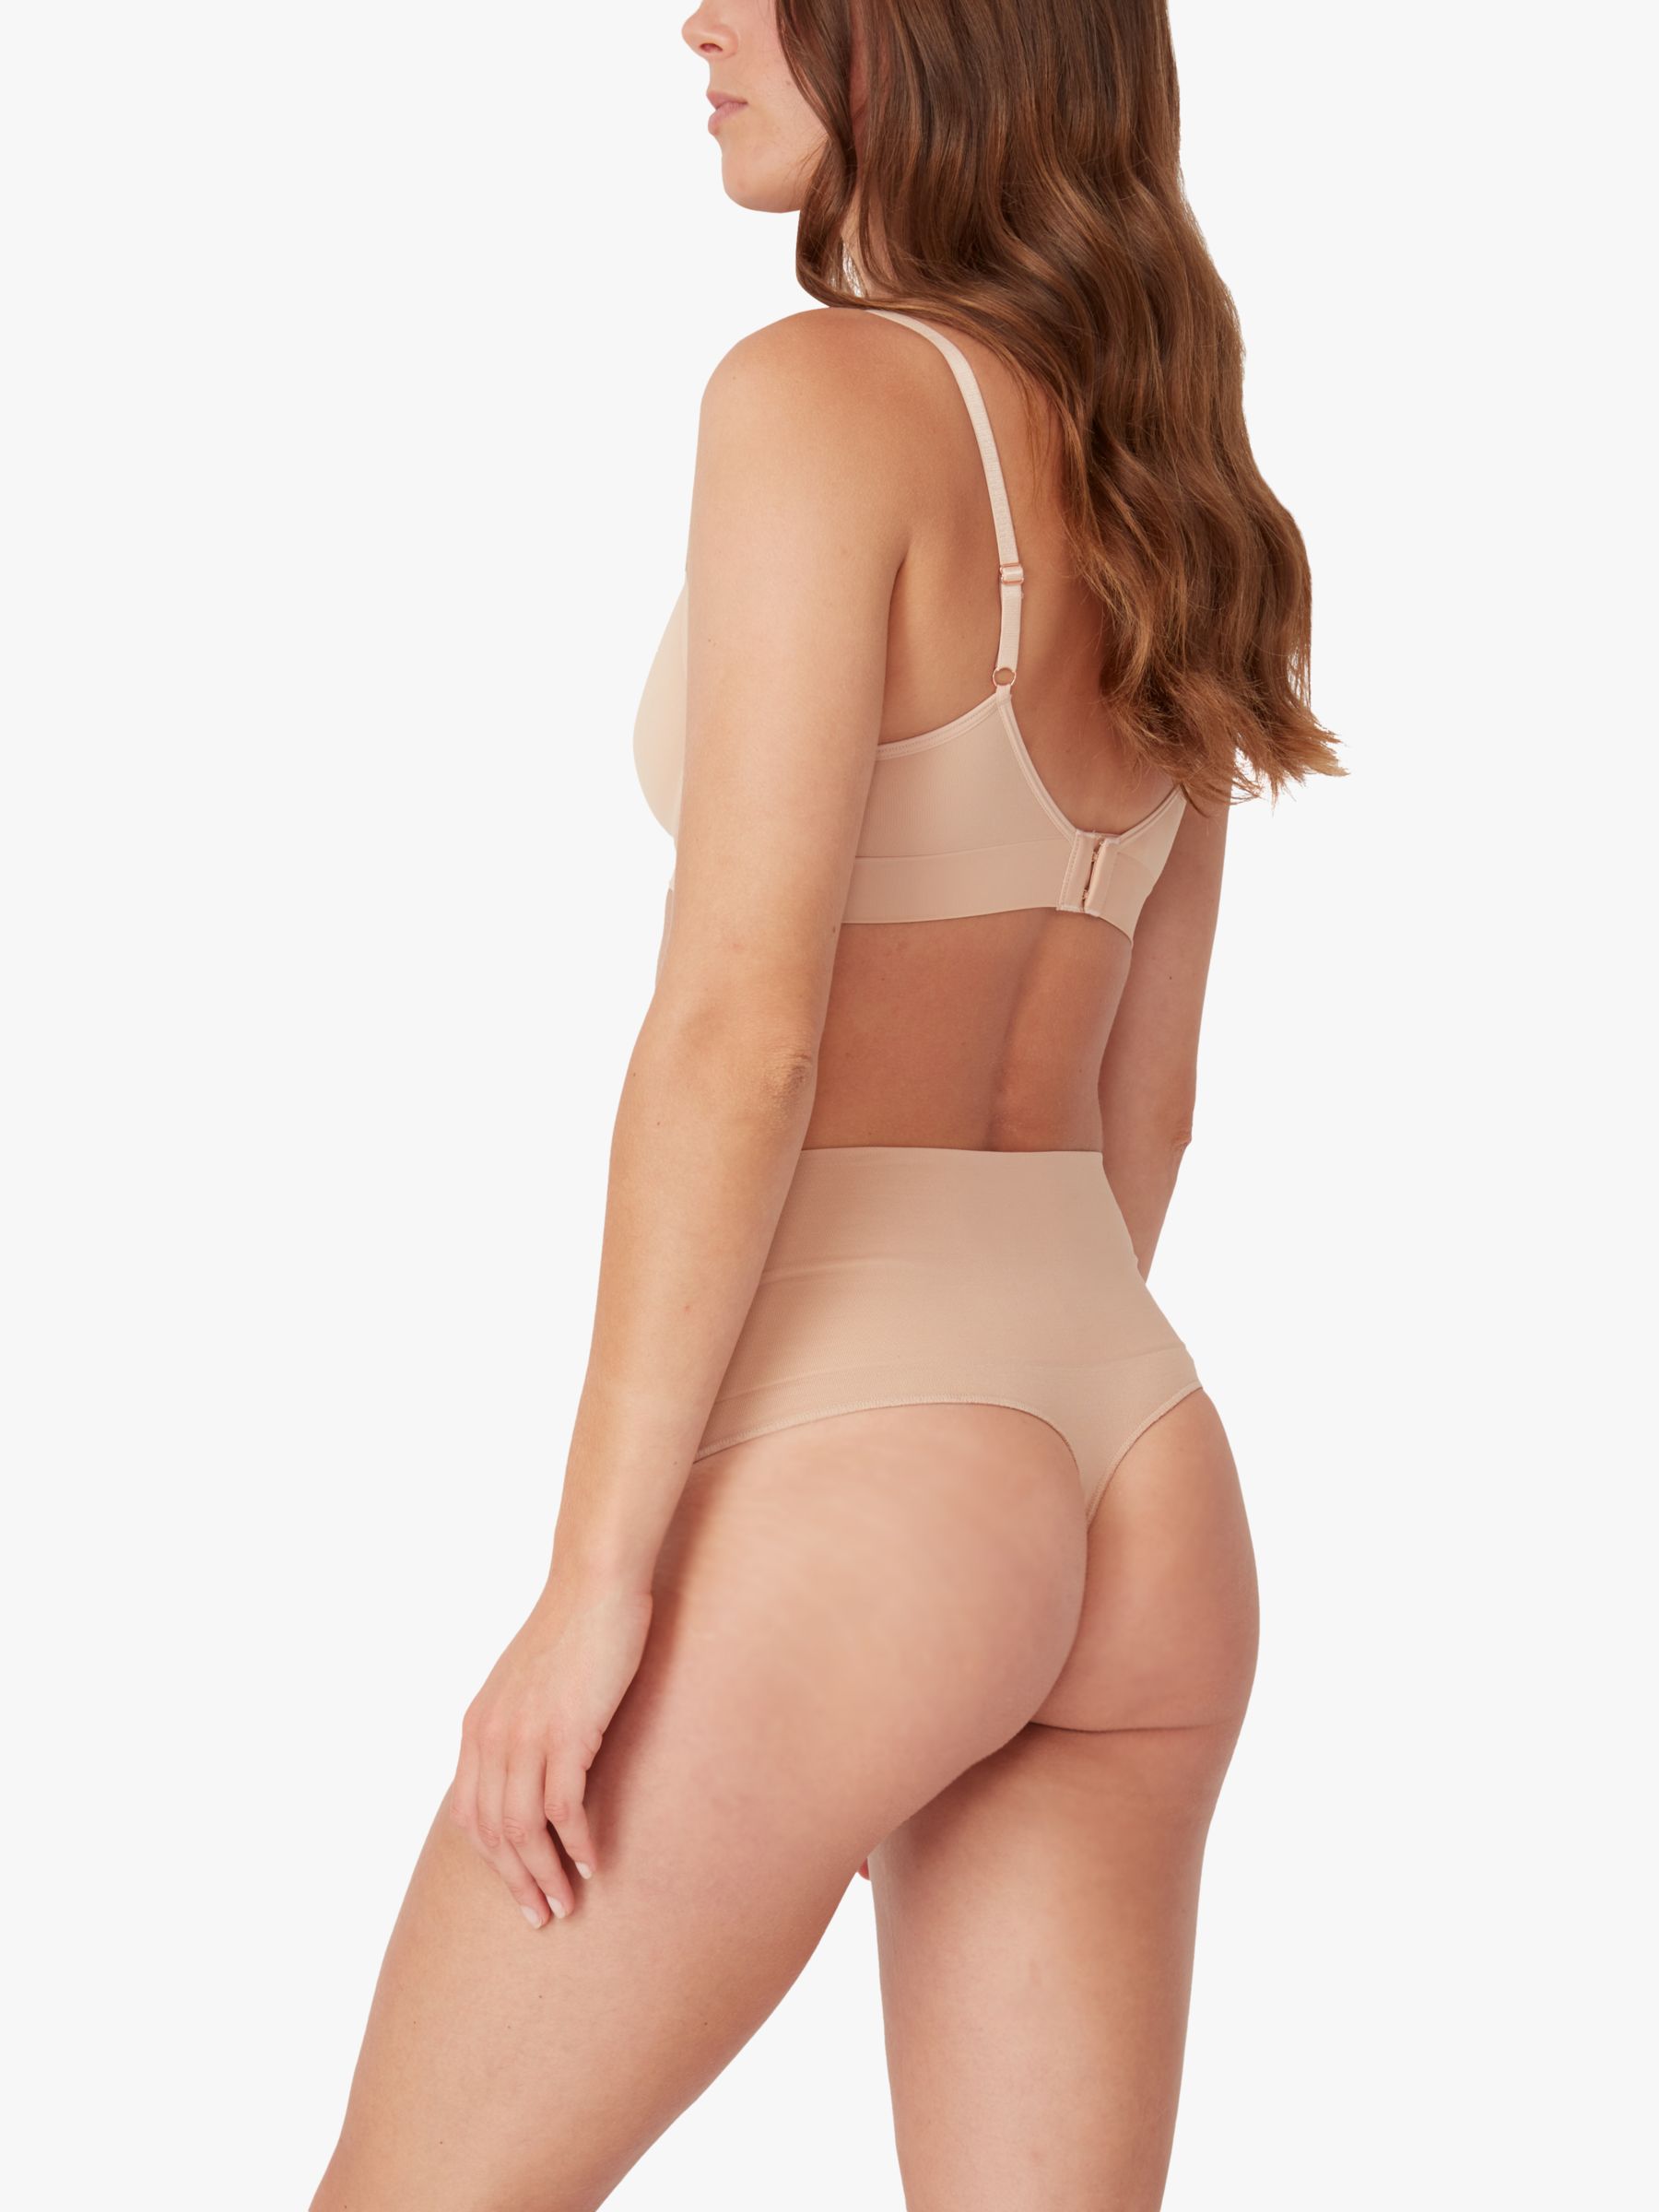 Ambra Seamless Smoothies G String Briefs, Pack of 2, Beige at John Lewis &  Partners